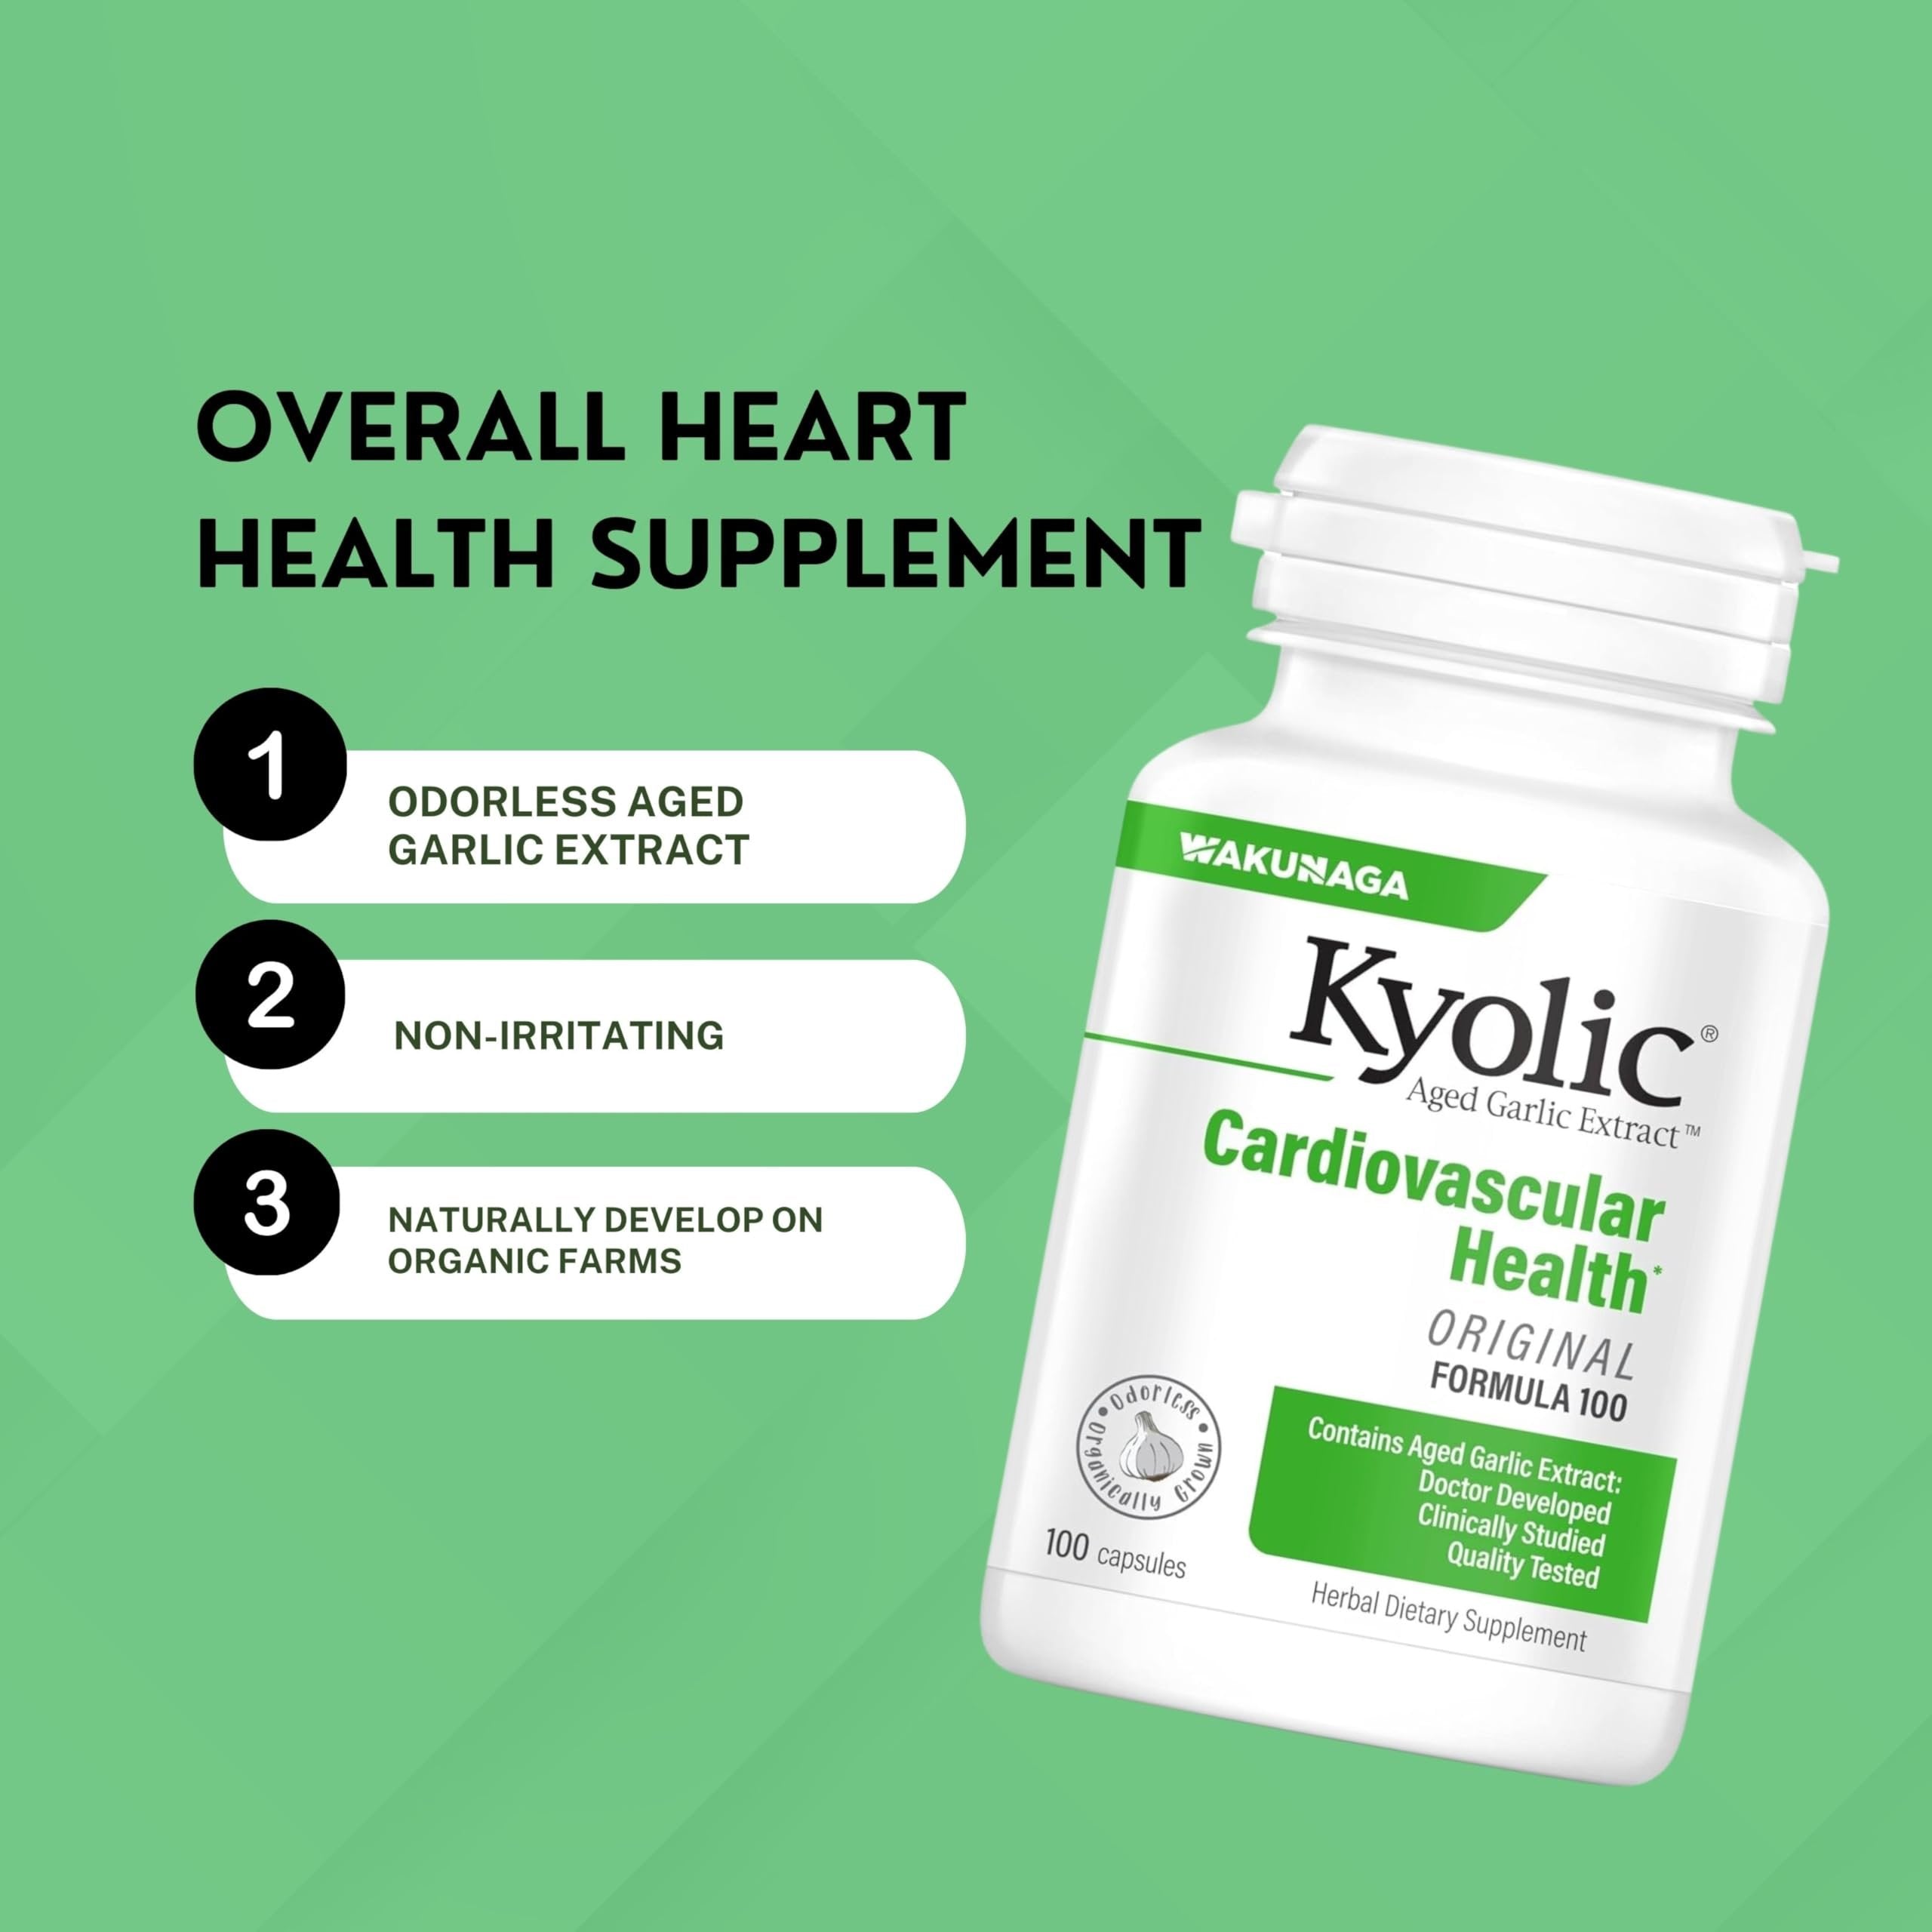 Worldwide Nutrition Bundle, 2 Items: Kyolic Aged Garlic Extract Formula 100, Original Cardiovascular, 100 Capsules and Multi-Purpose Key Chain (Packaging May Vary)